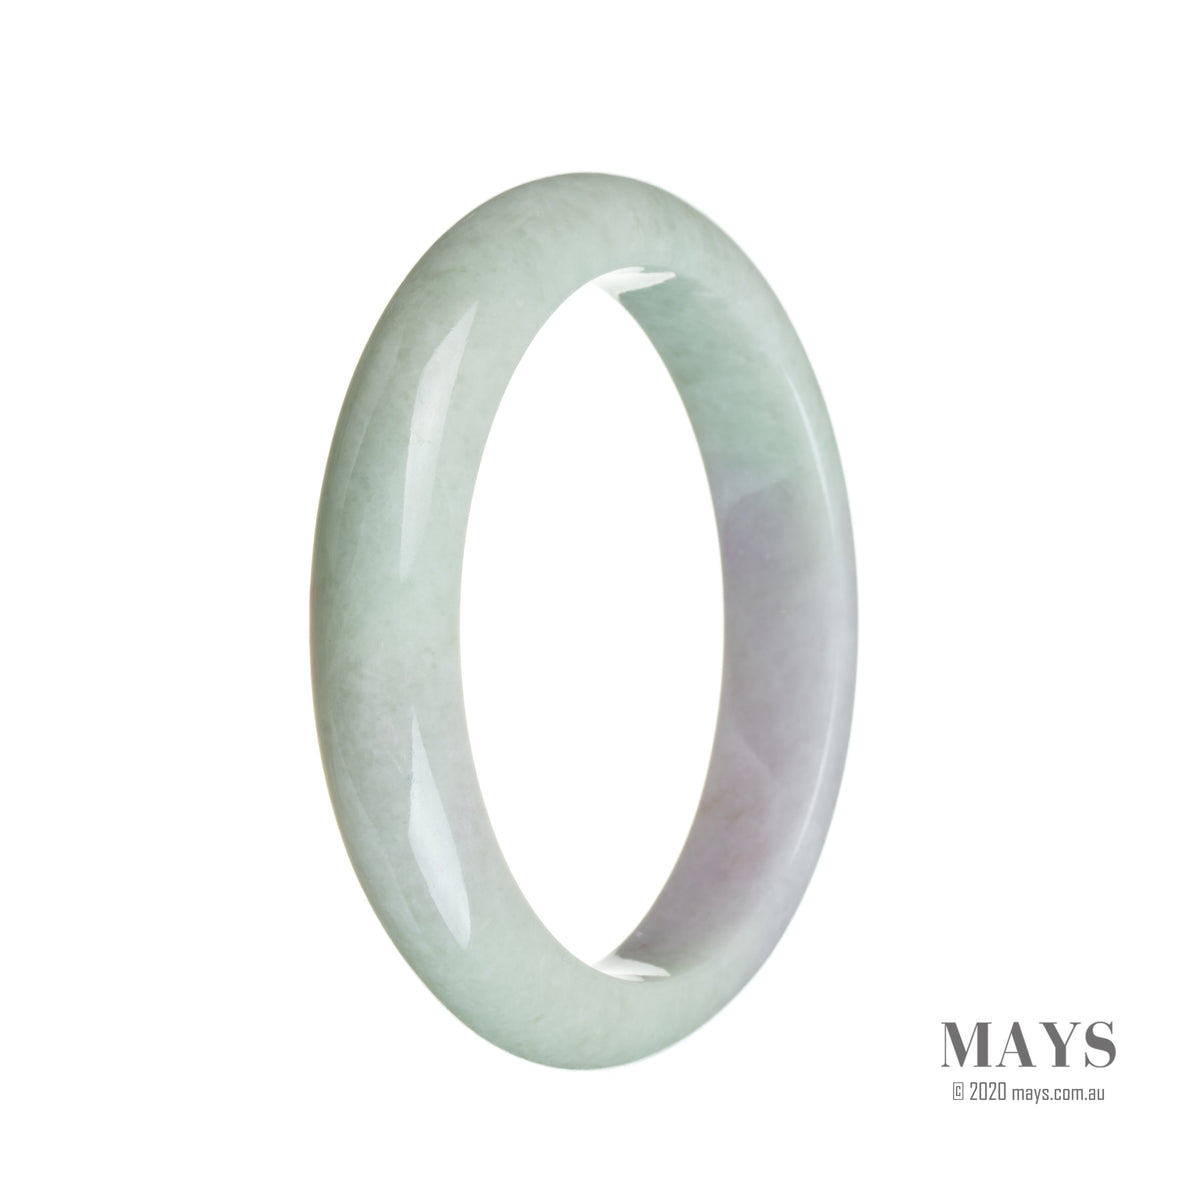 A close-up photo of a lavender and green jade bangle, with intricate natural patterns and a semi-round shape. This bangle is 58mm in size and is a genuine piece from the MAYS™ collection.